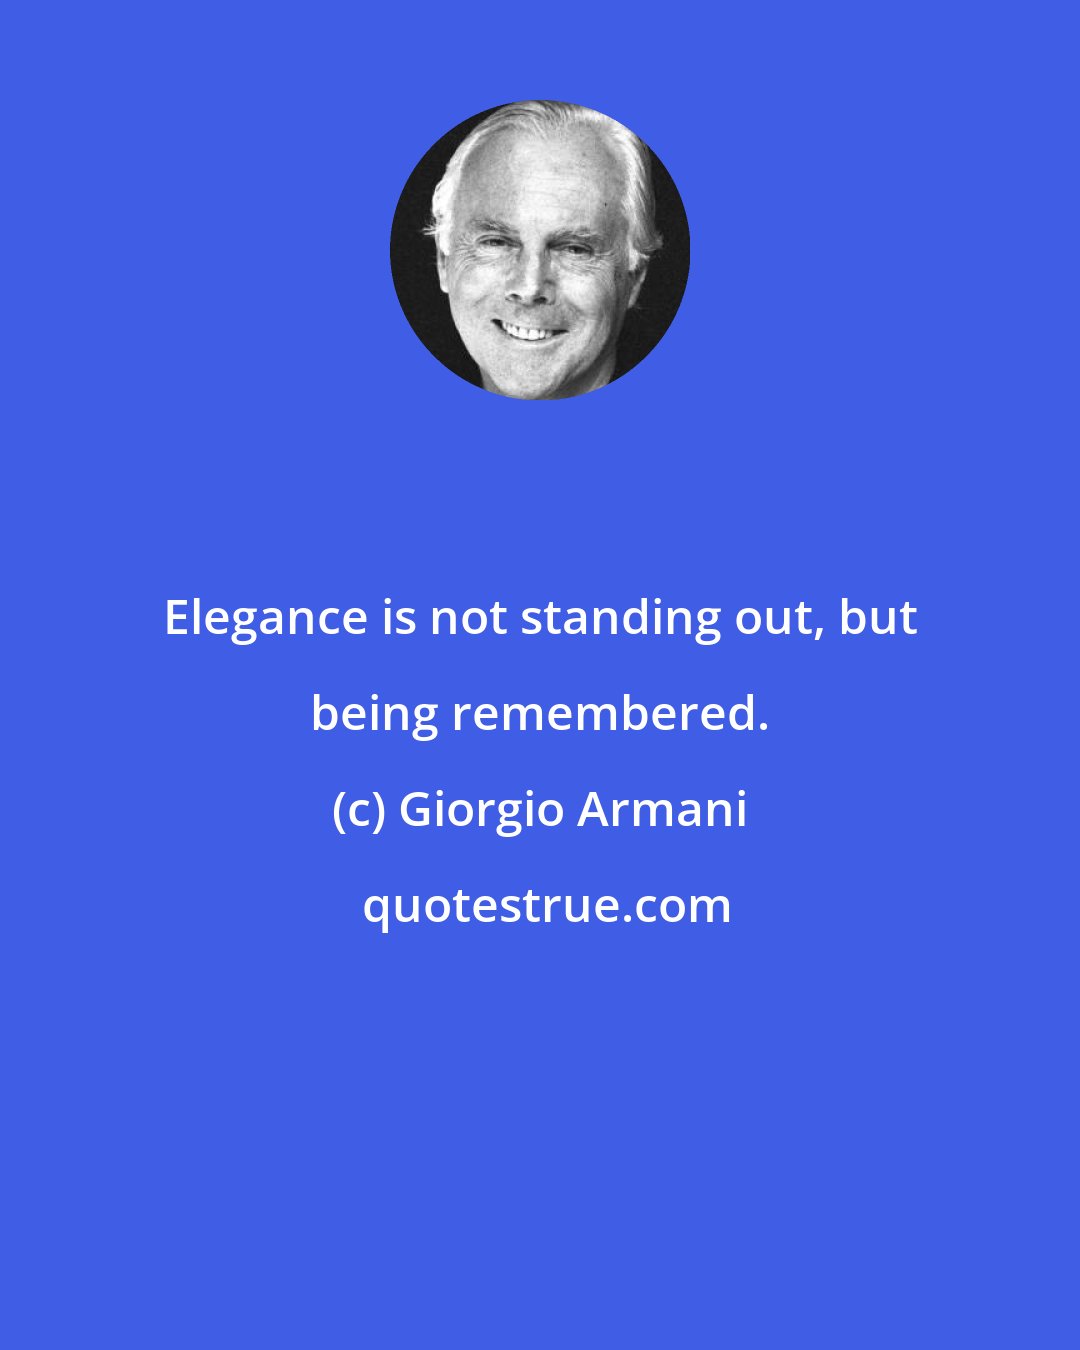 Giorgio Armani: Elegance is not standing out, but being remembered.